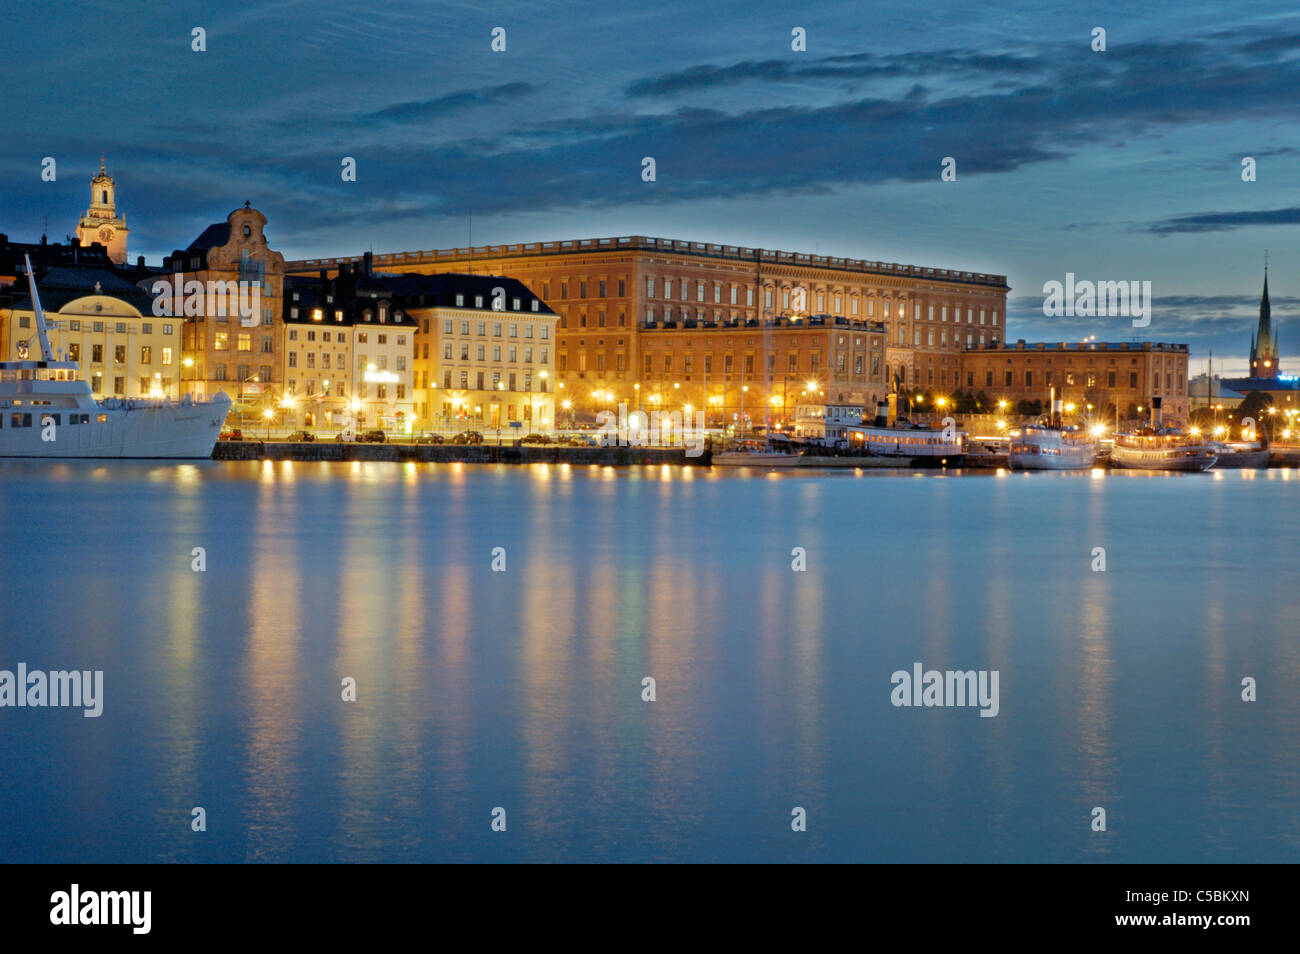 Royal castle in a distance with calm and placid sea in the foreground at night, Stockholm, Sweden Stock Photo